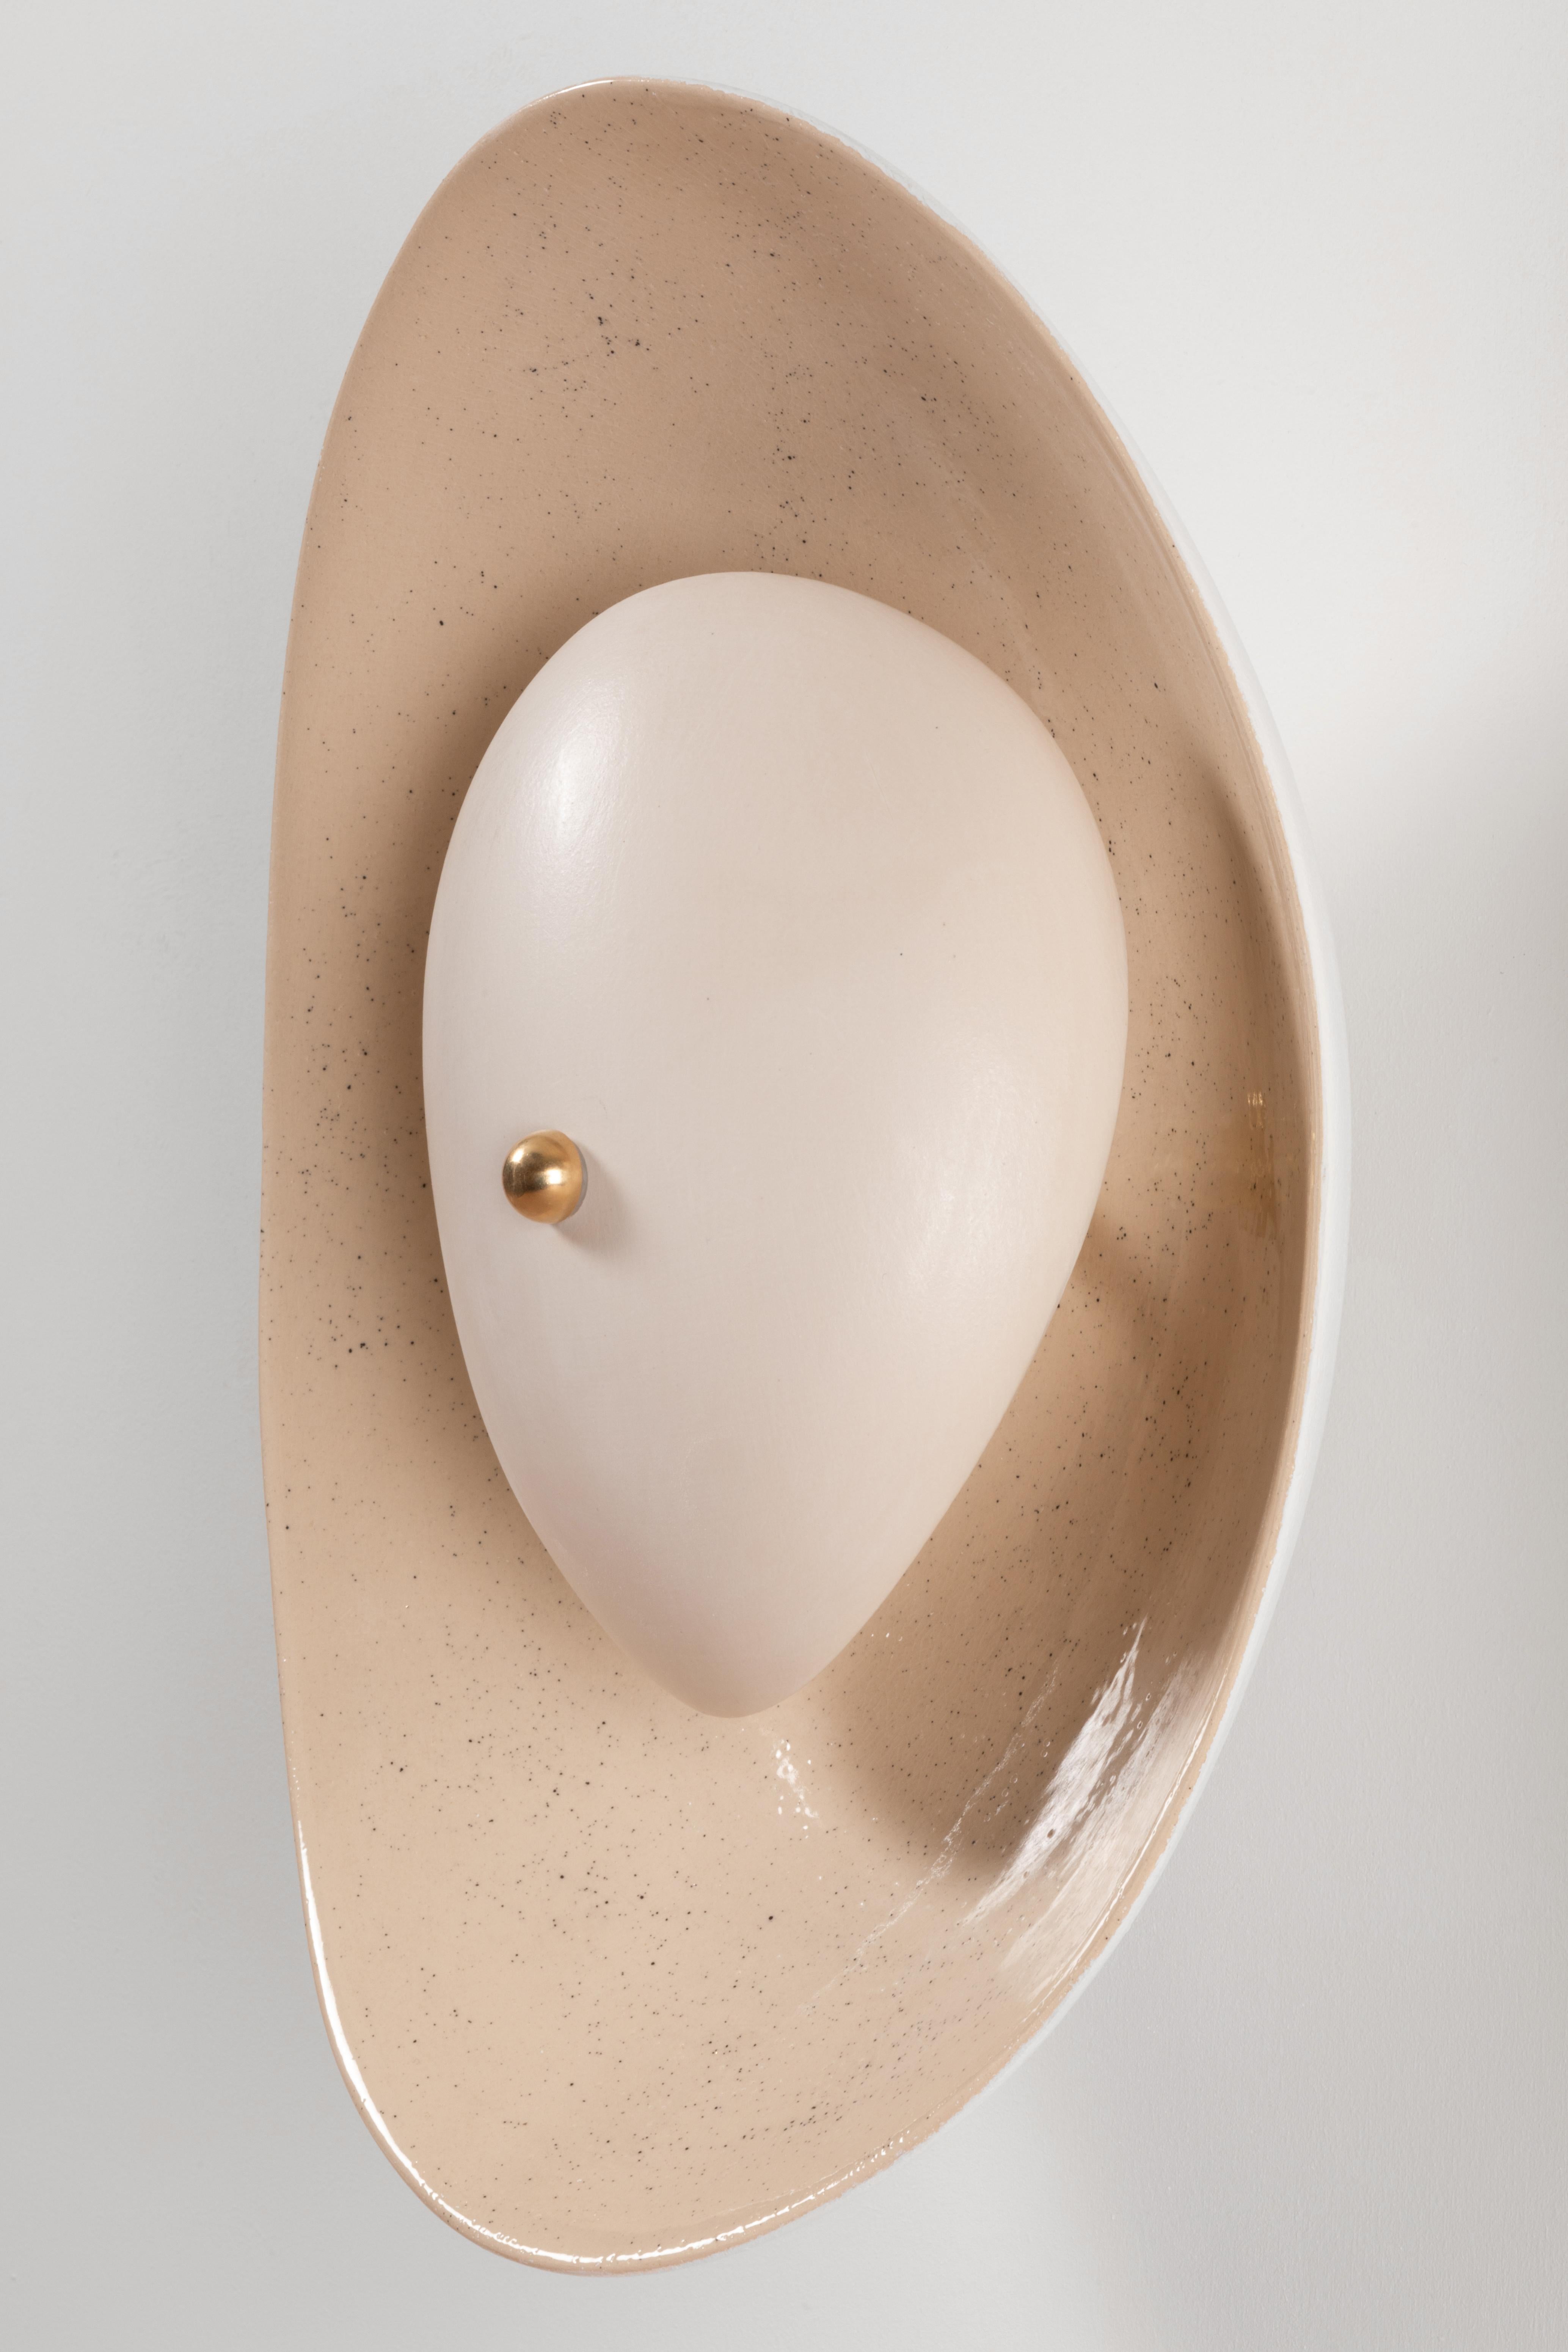 Hera Wall Sconce by Elsa Foulon
Dimensions: D 30 x W 22 x H 35 cm
Materials: Ceramic, Brass.
Unique Piece. Also available in different finishes.
All our lamps can be wired according to each country. If sold to the USA, it will be wired for the USA,